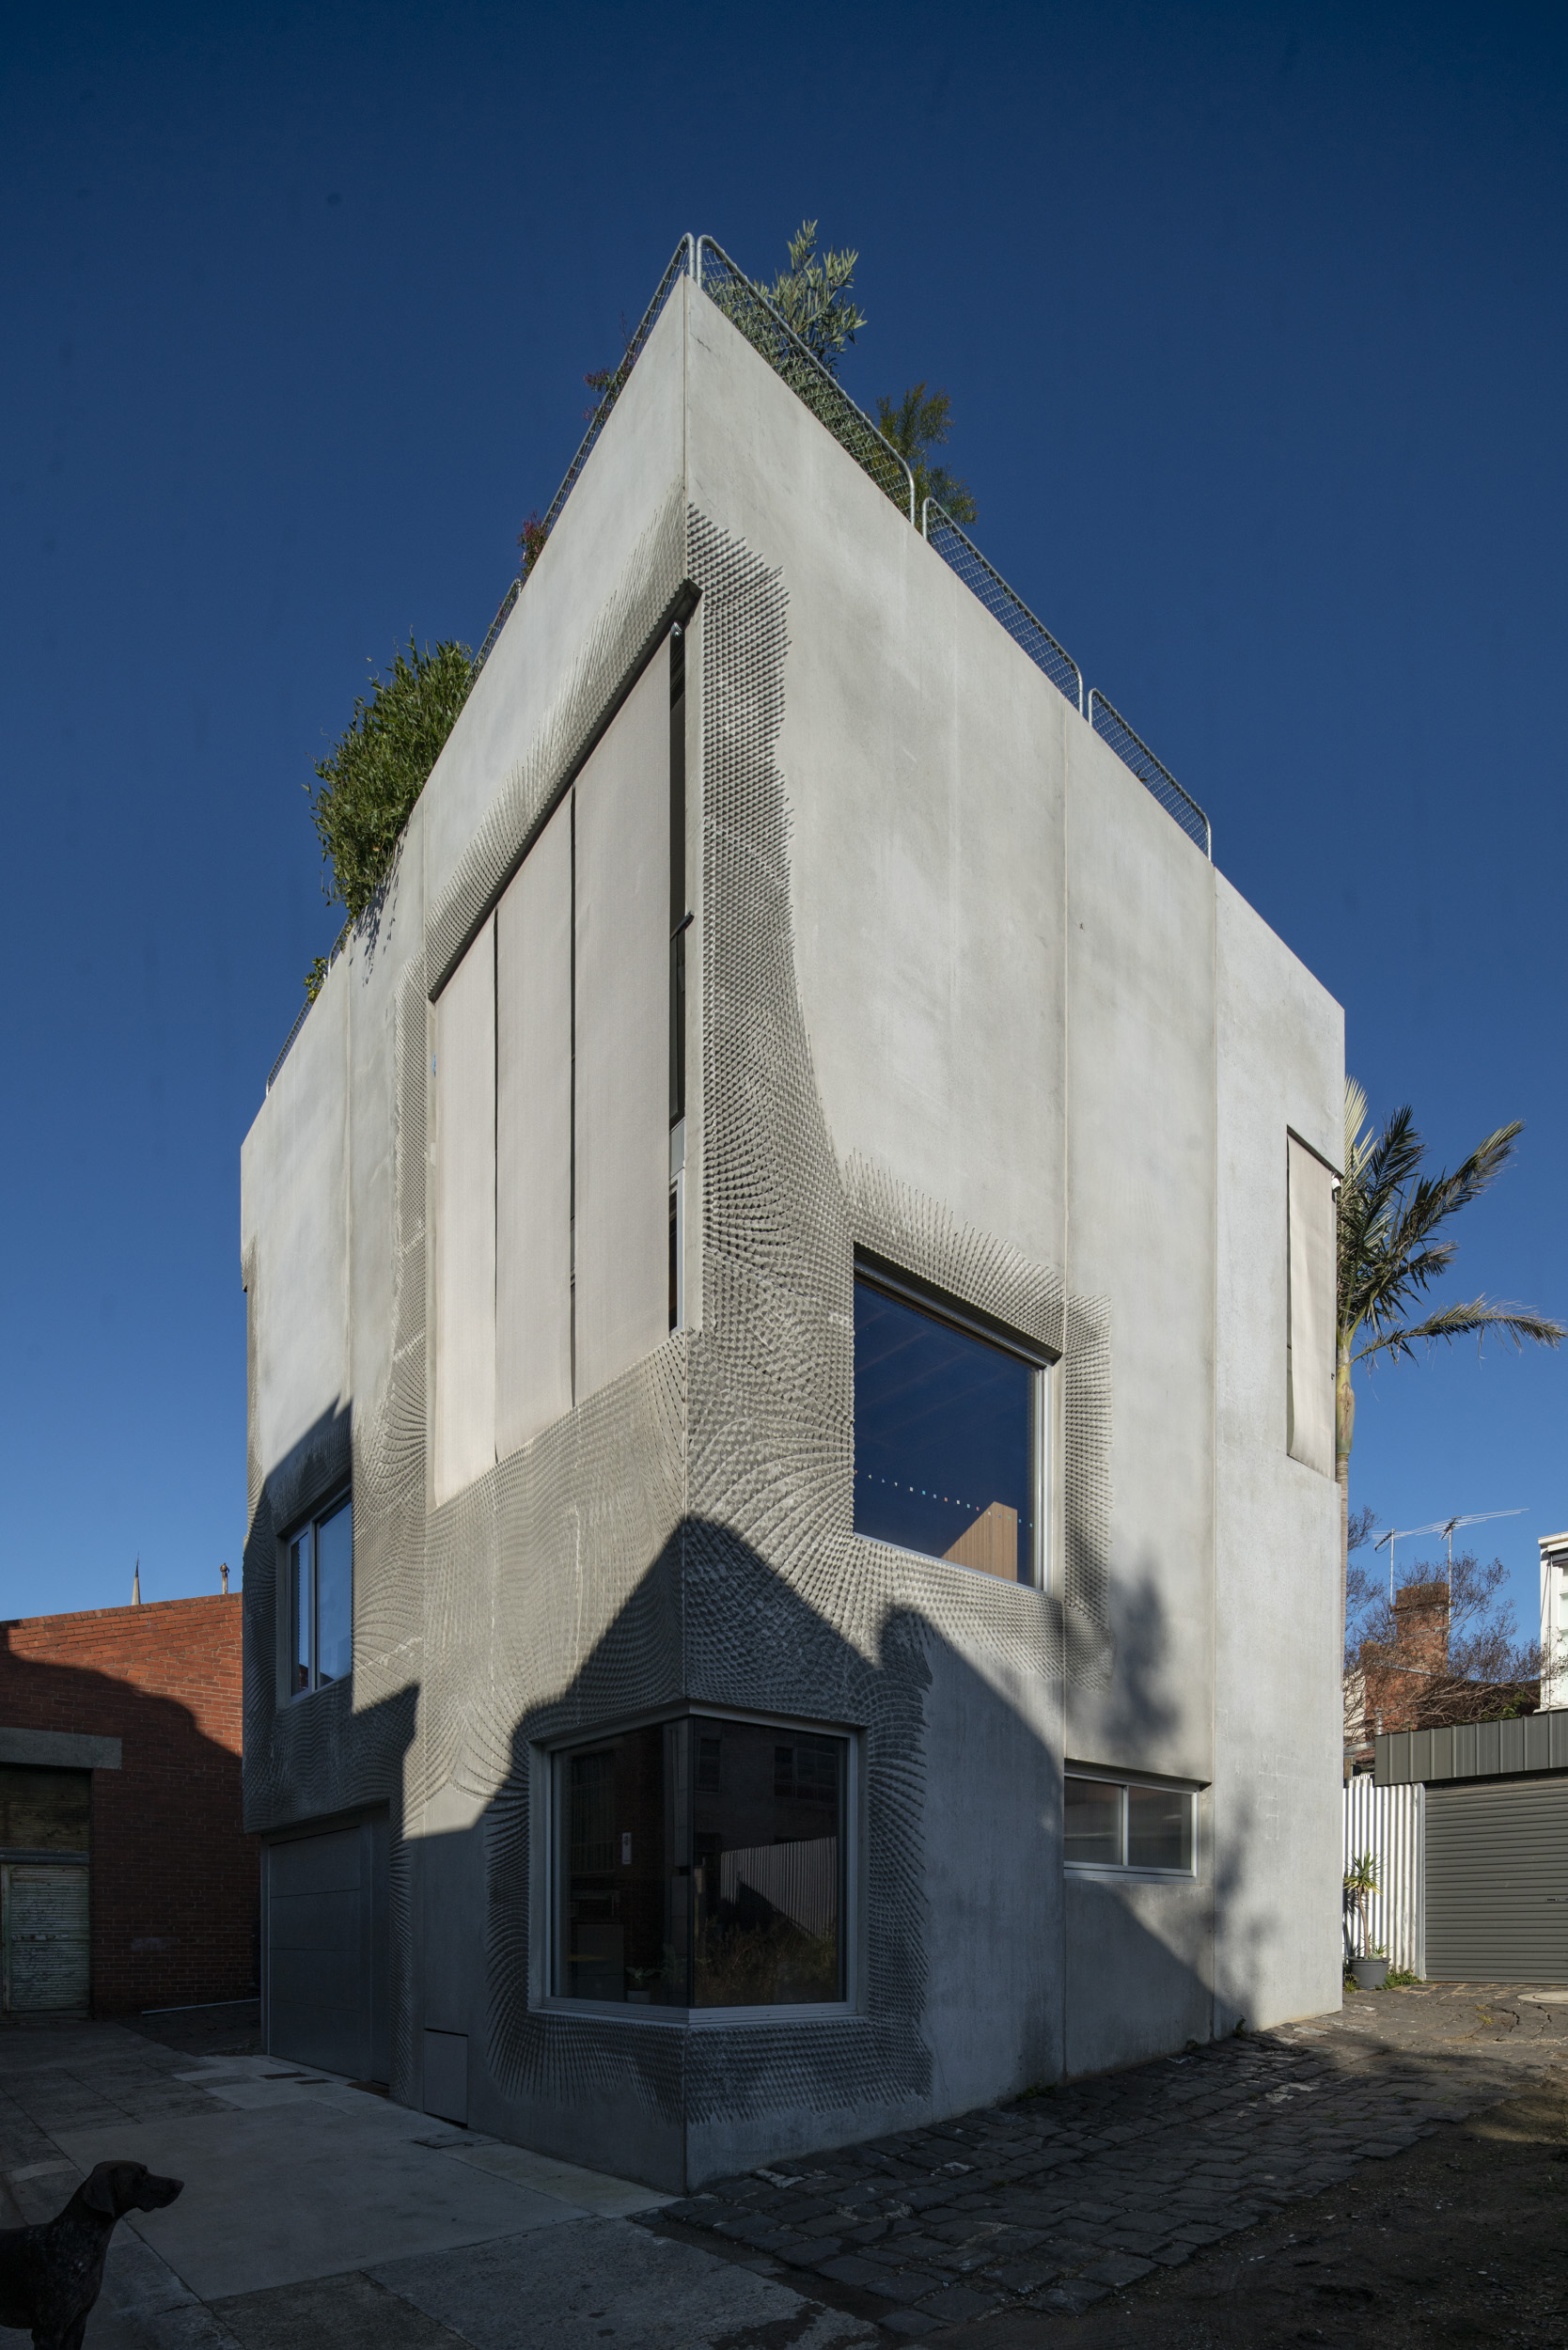 The completed 3-story concrete house with a roof garden